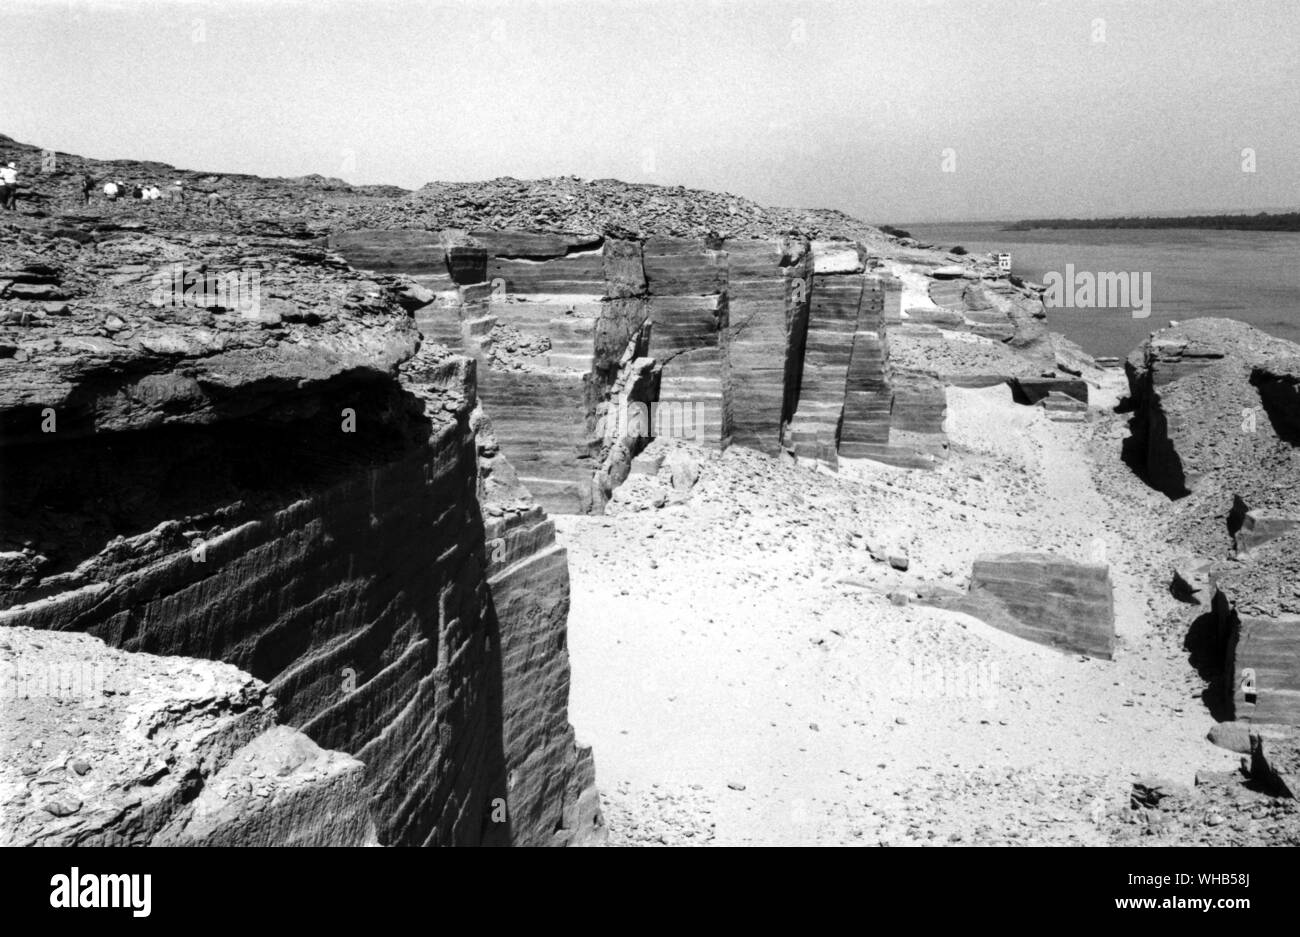 A silsila quarry. Probably Gebel el-Silsila or Gebel Silsileh north of Aswan on the river Nile, was a very famous quarrying area throughout ancient Egypt. Stone was probably taken from here to construct the Temple of Horemheb.. . . Stock Photo